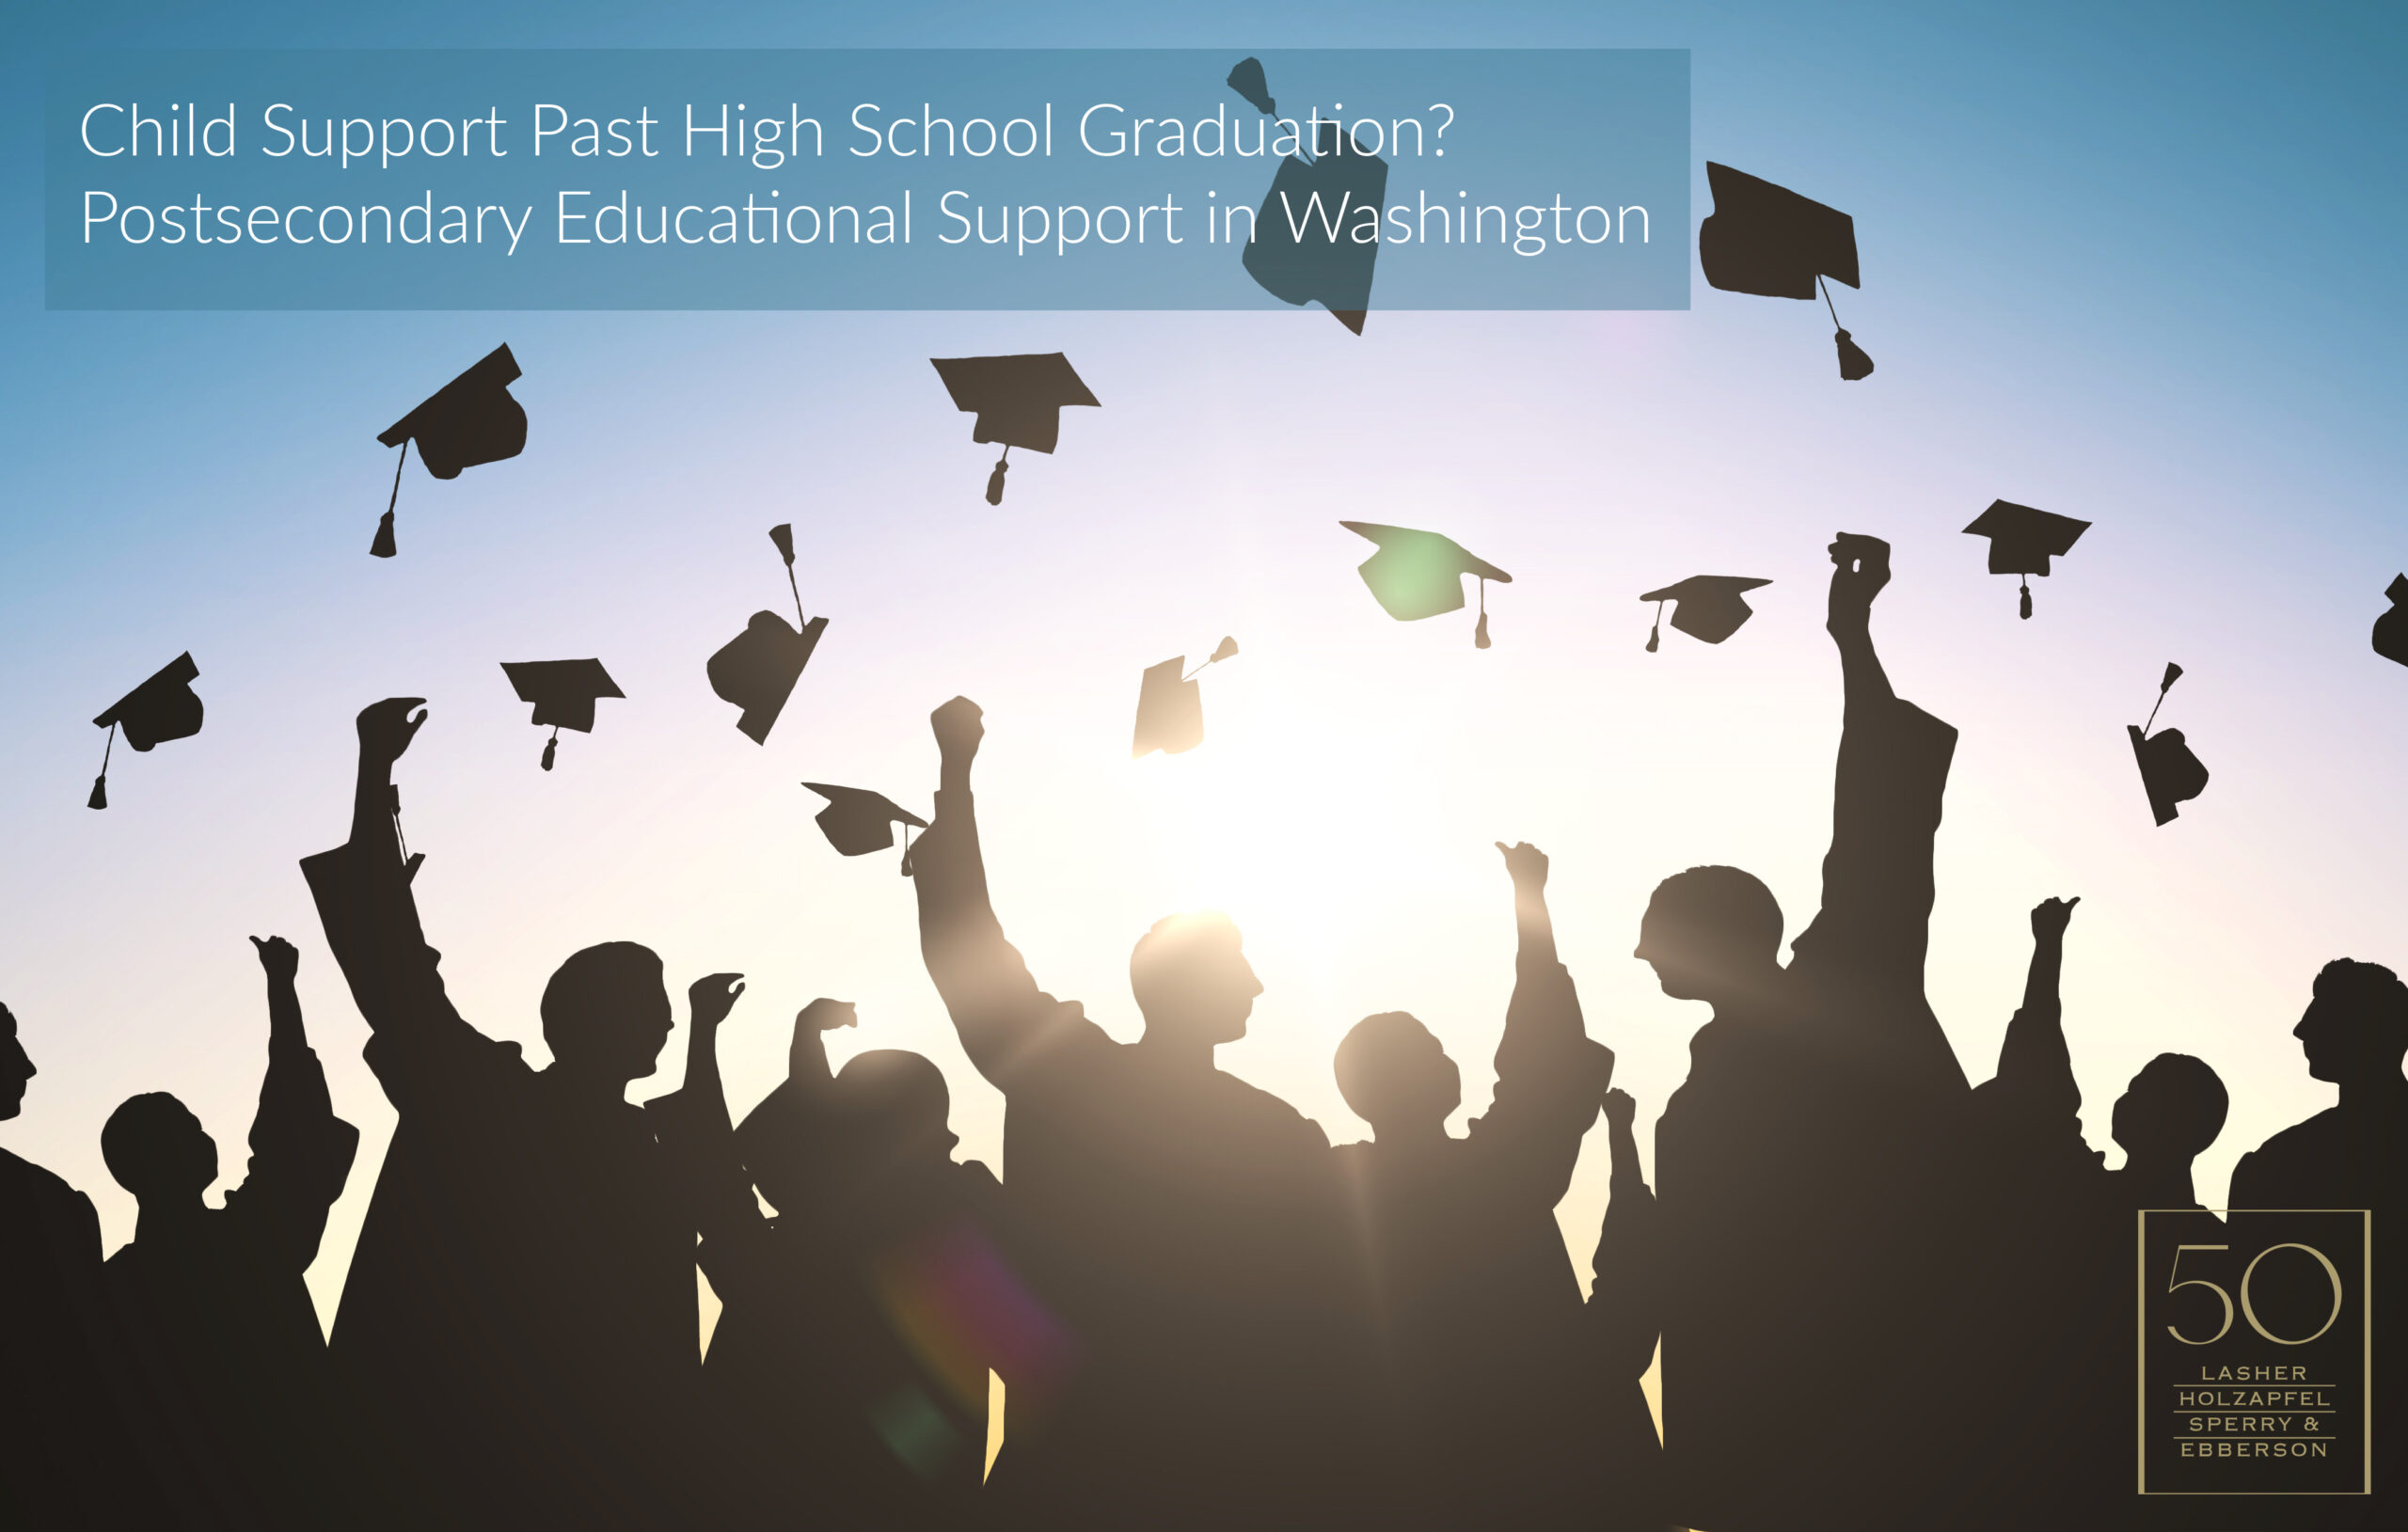 Child Support Past High School Graduation? Postsecondary Educational Support in Washington